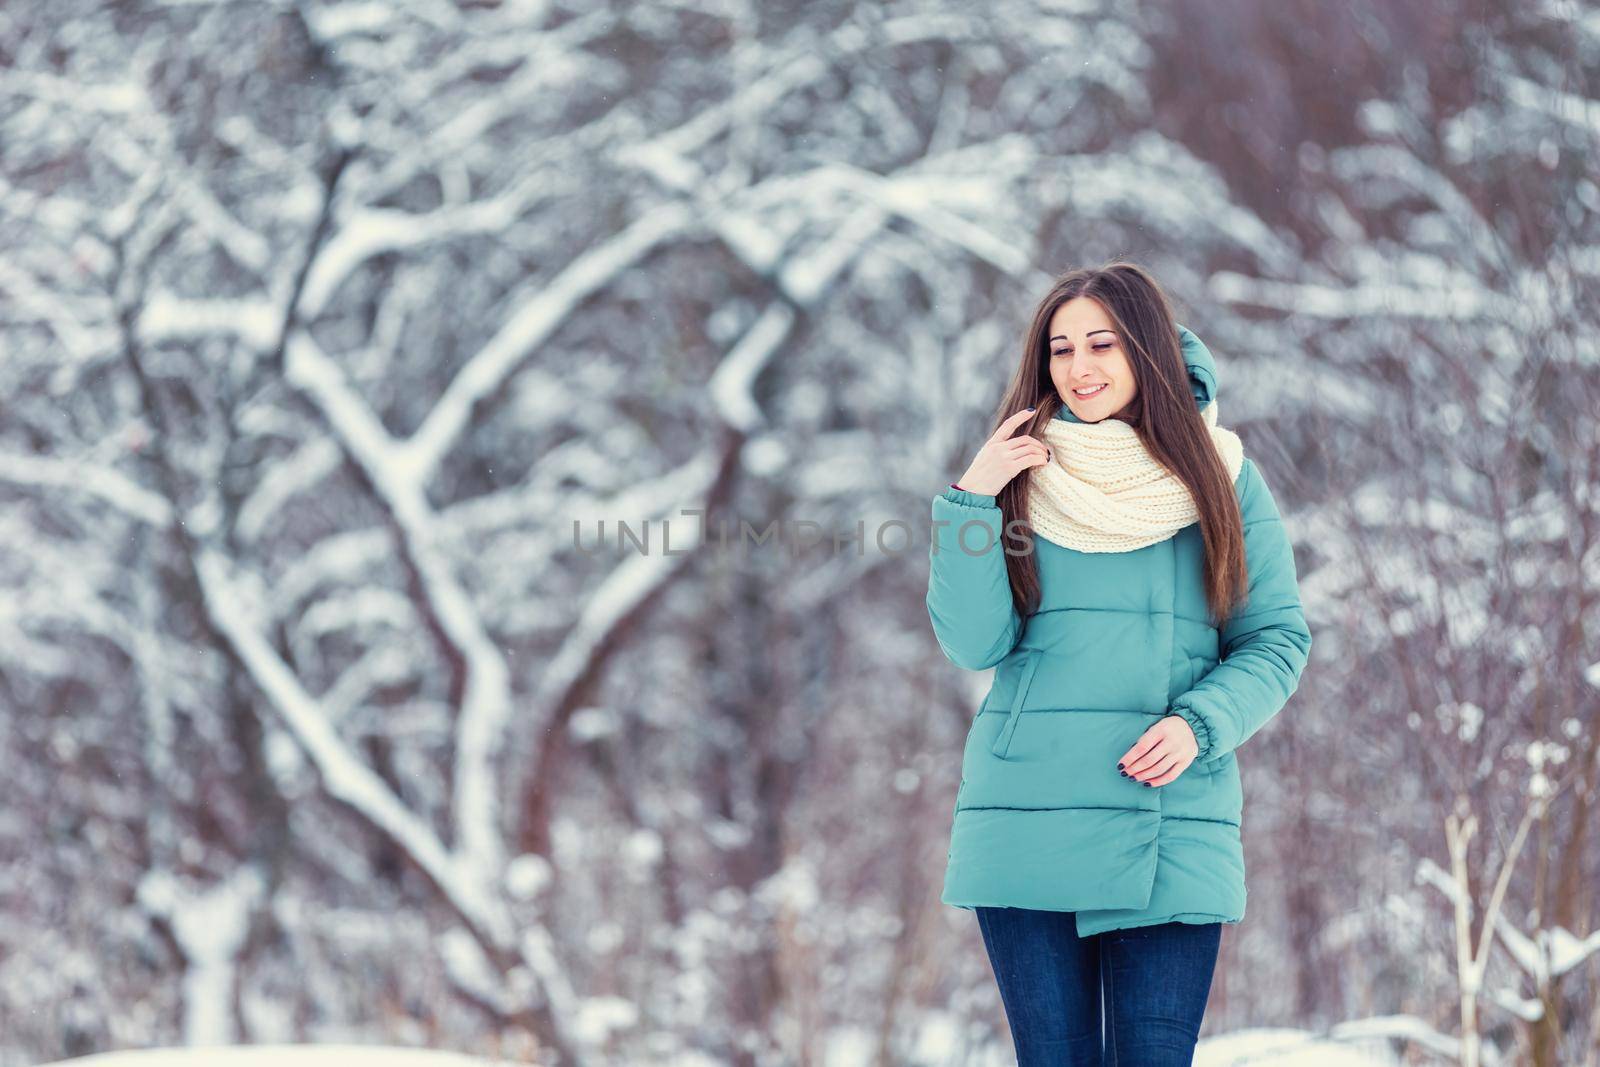 girl on the background of snowy trees by zokov